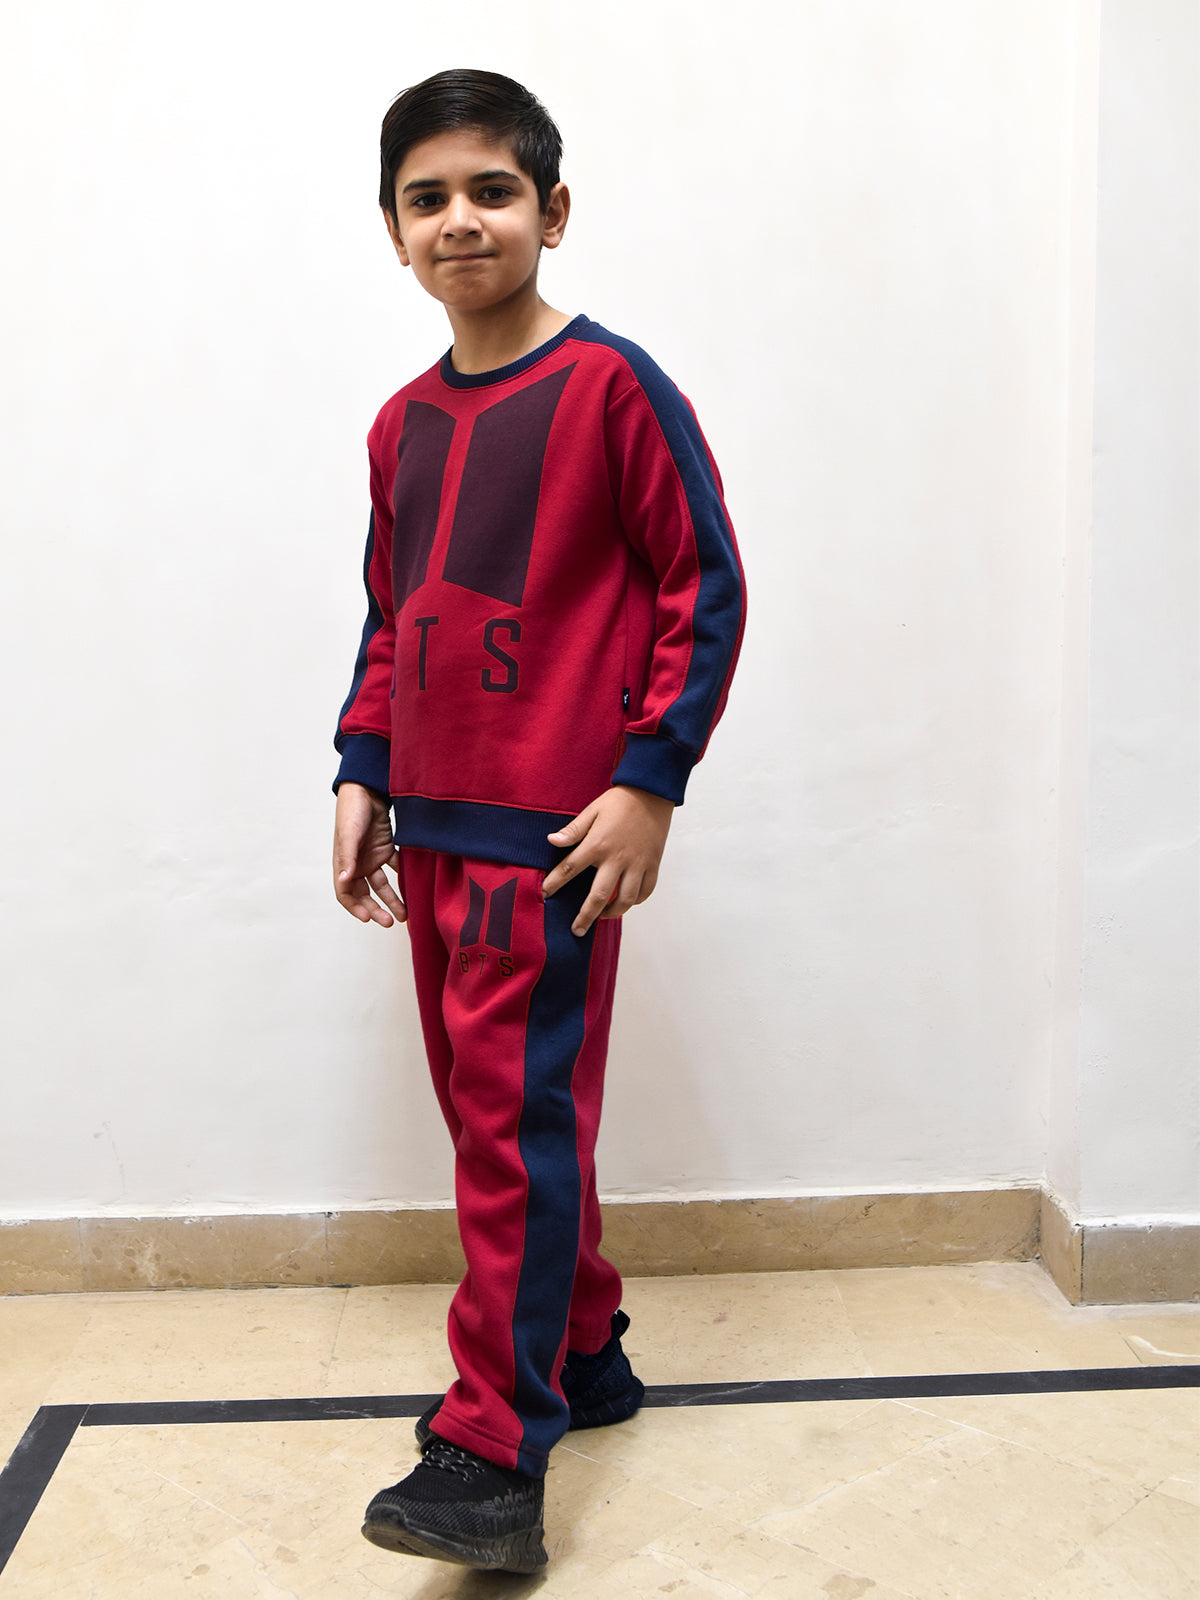 BTS Fleece Tracksuit For Kids-Dark Red with Navy Panels-BE54/BR879